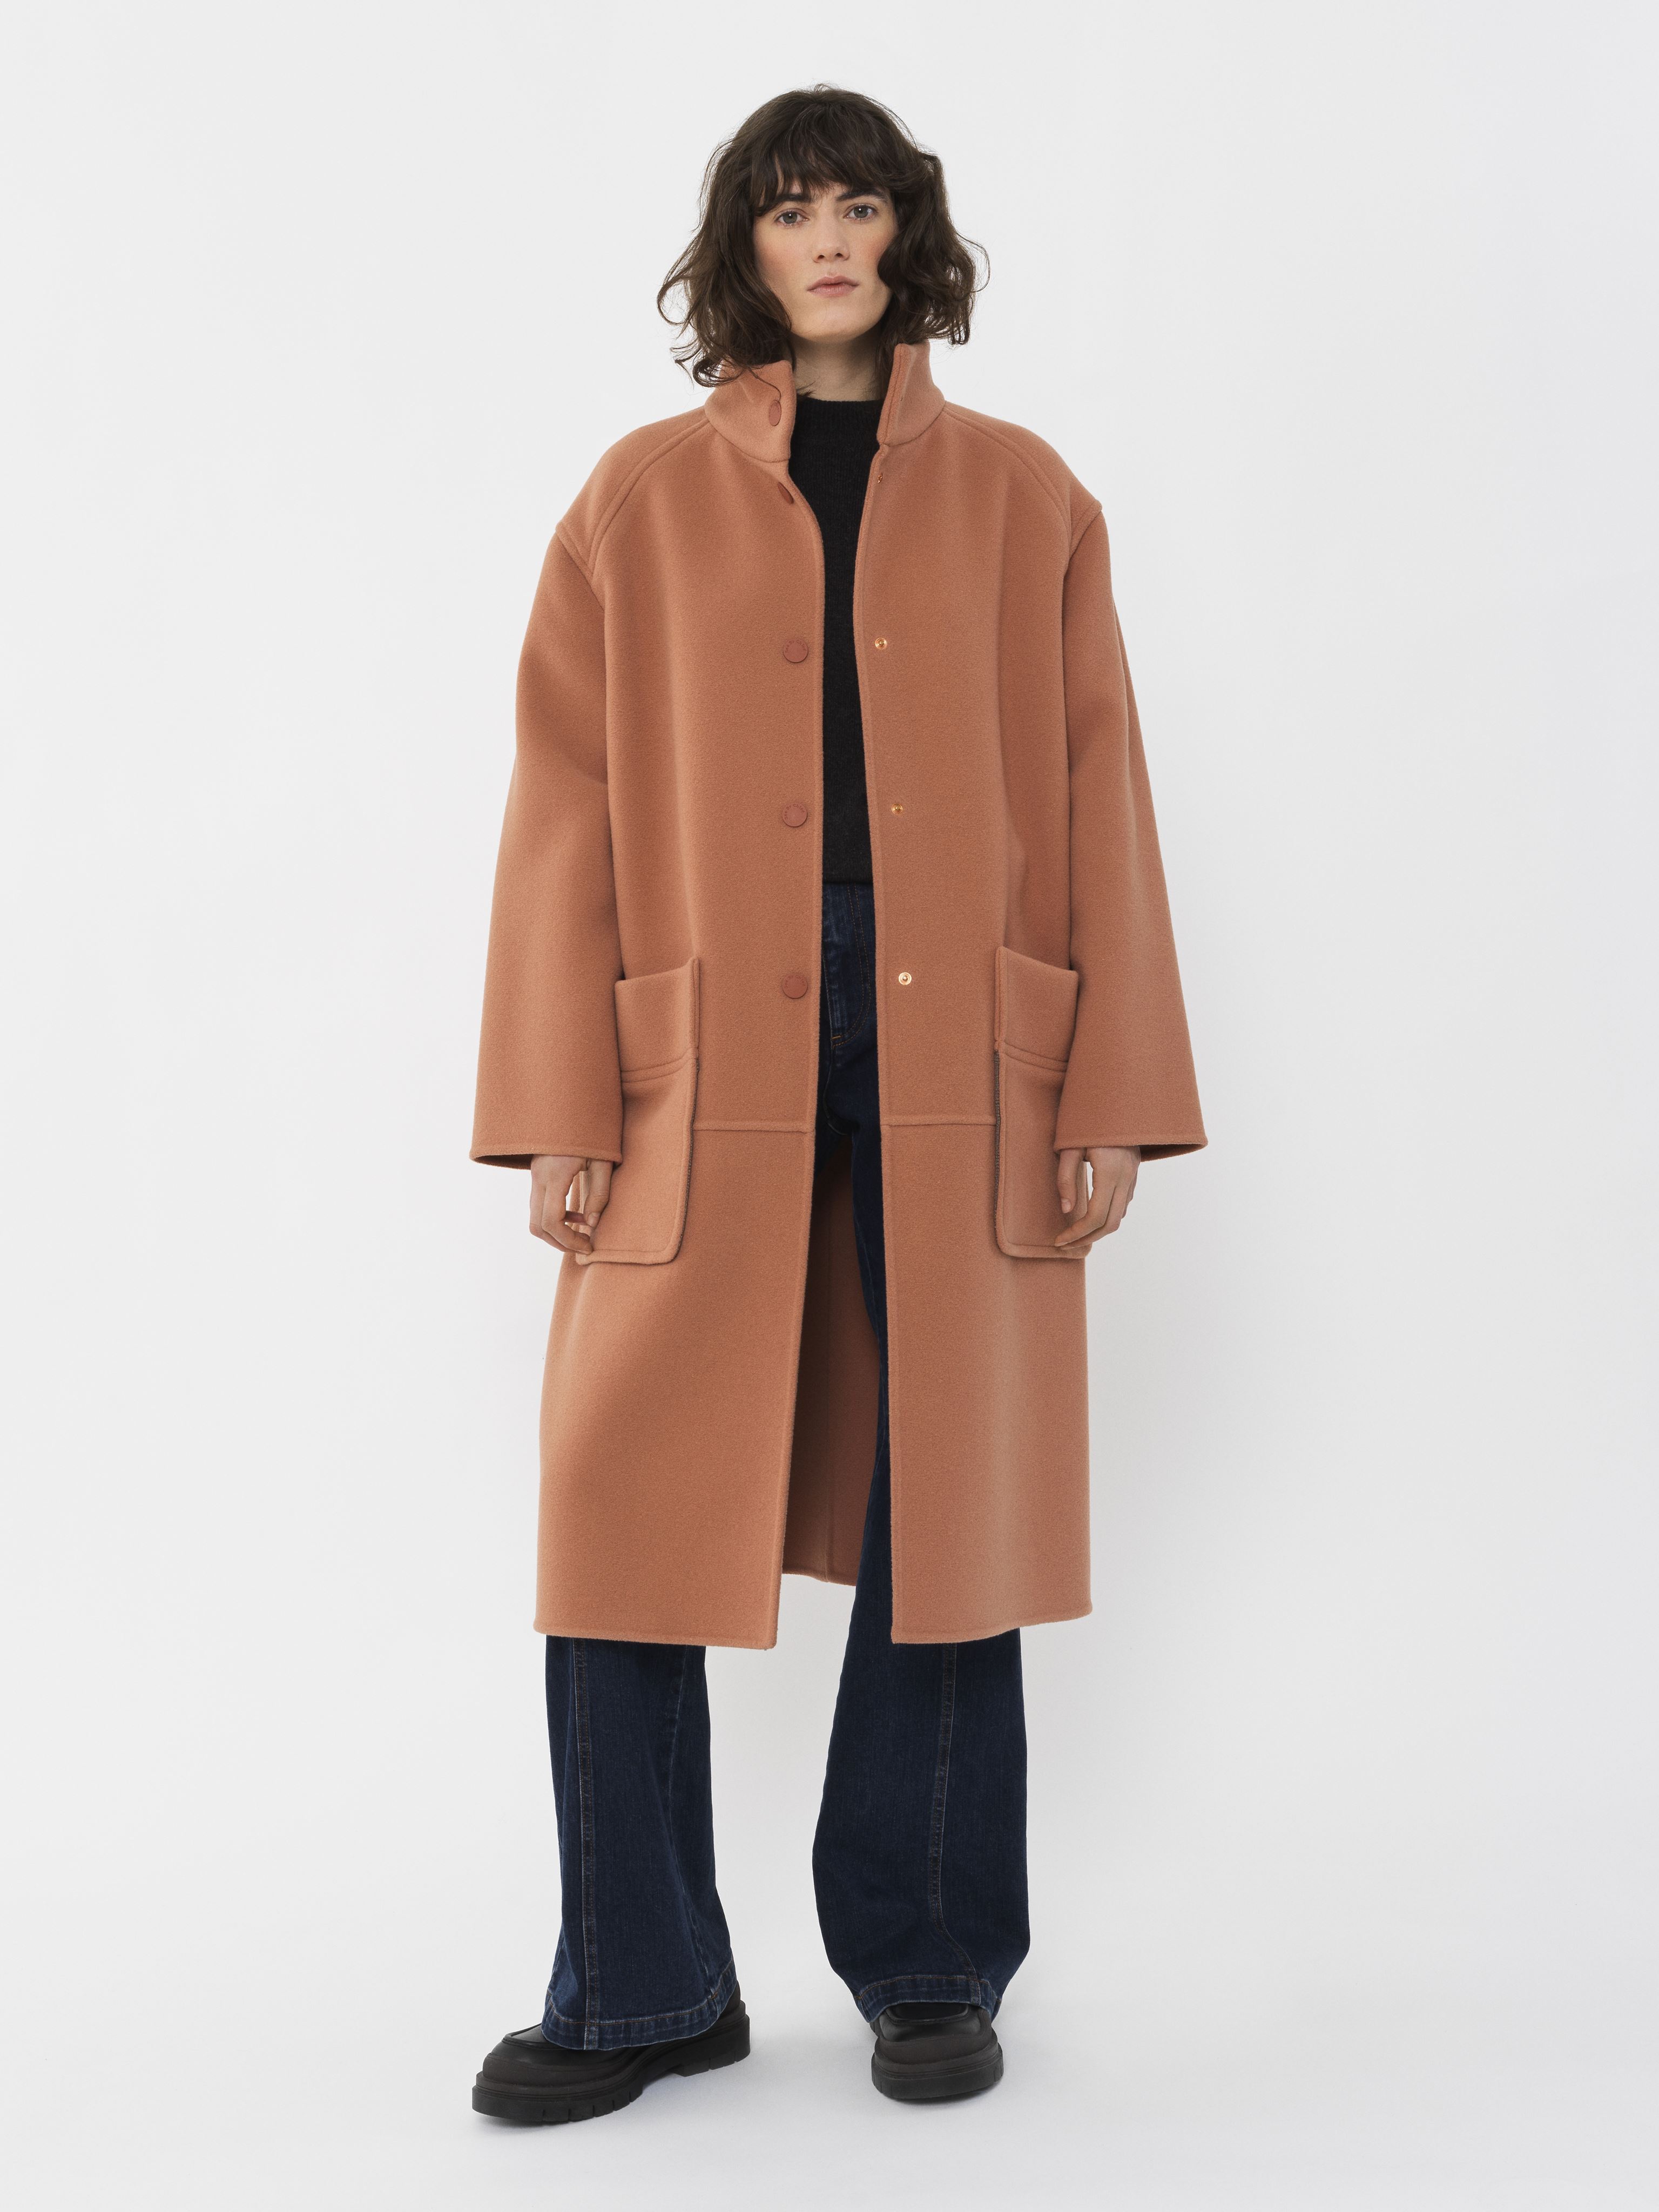 SEE BY CHLOÉ HIGH-NECK COAT BROWN SIZE 2 78% VIRGIN WOOL, 22% POLYAMIDE